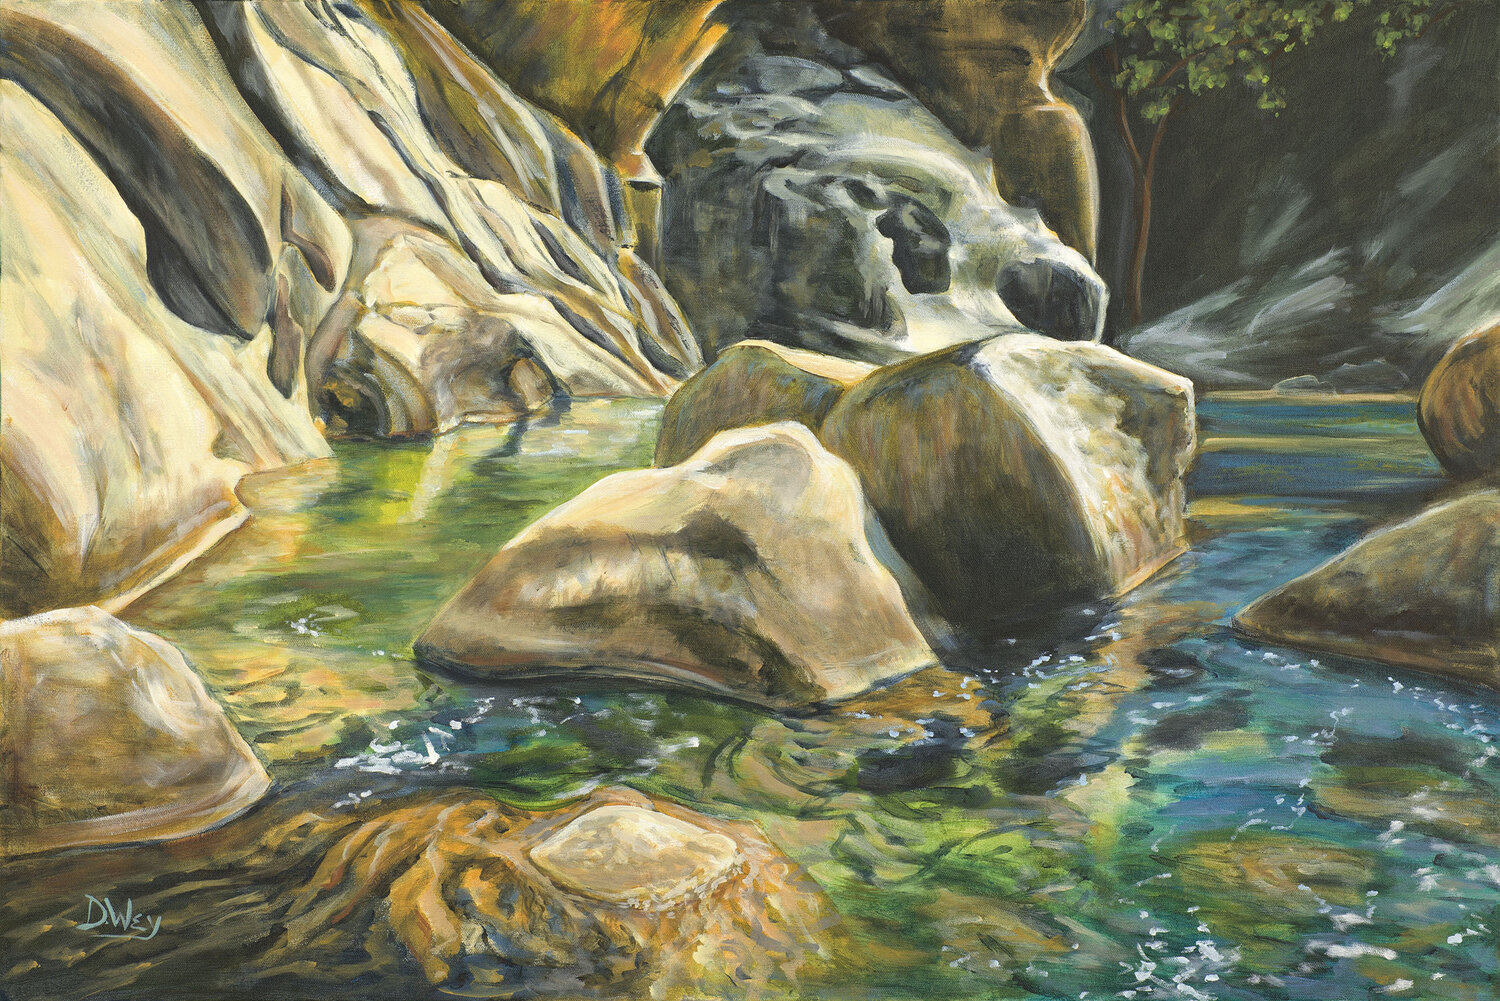 River Rocks, Nor Cal by Denise Wey